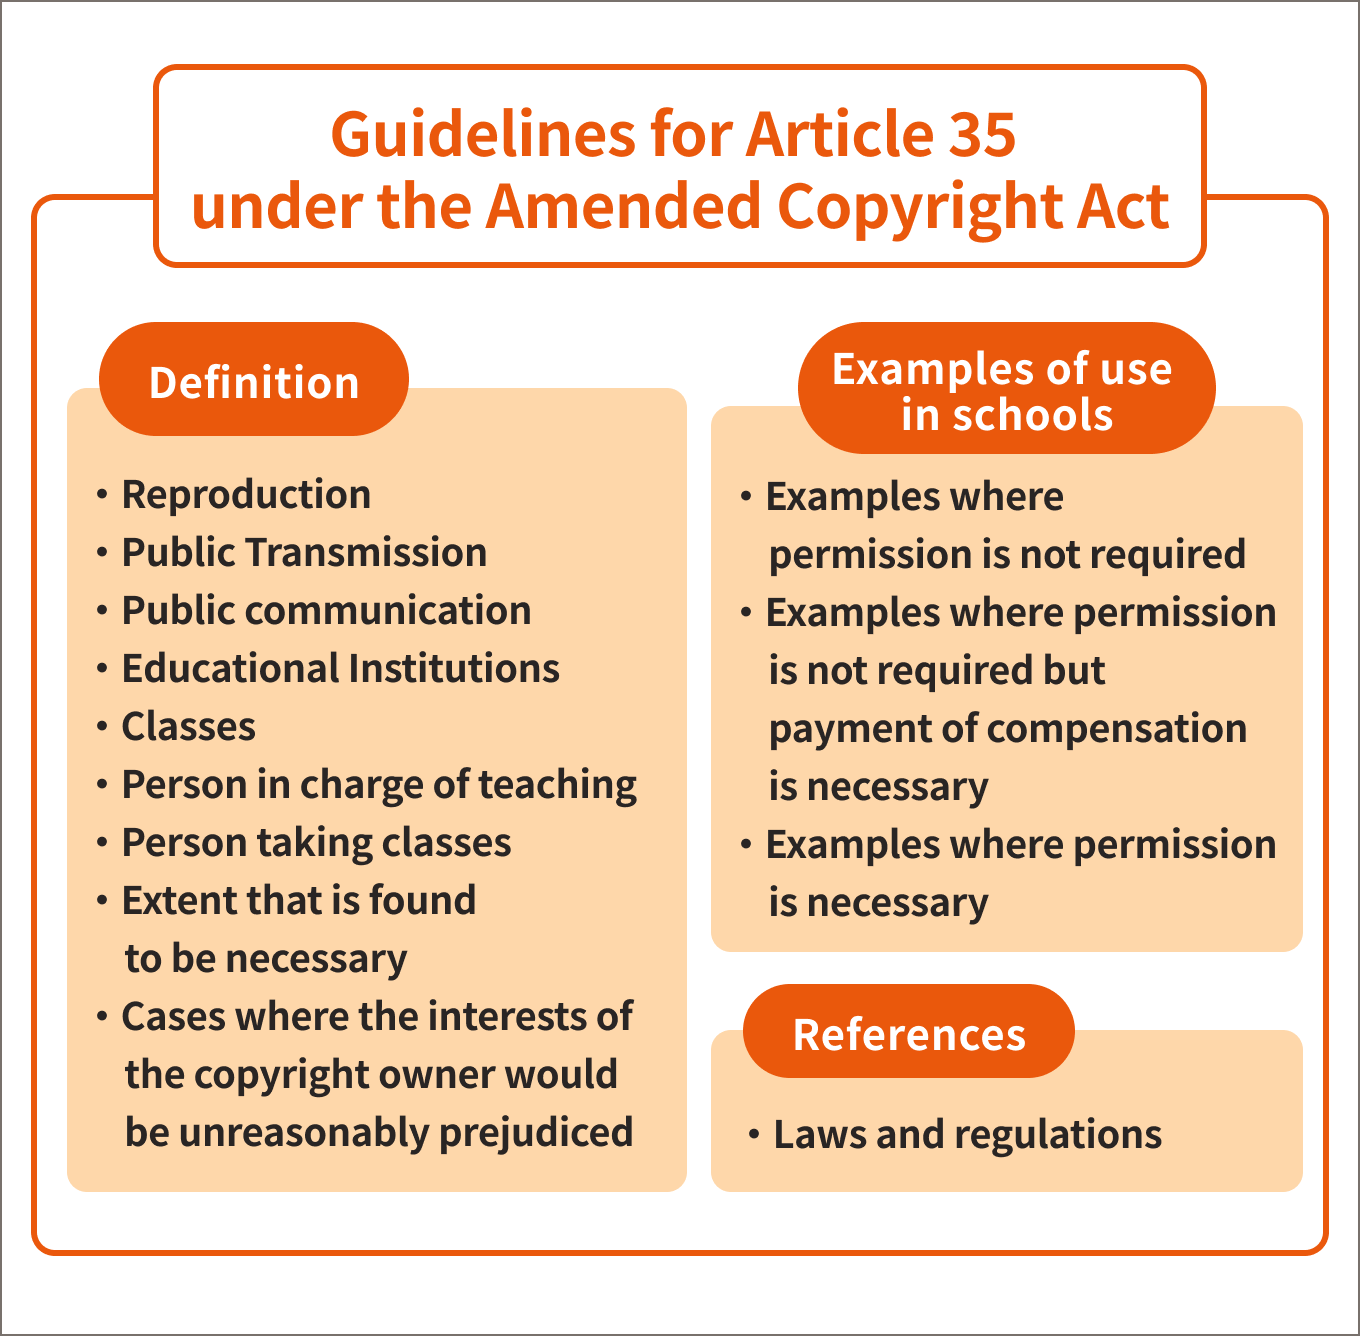 The terms defined in the Guidelines include reproduction, public transmission, public communication, educational institutions, classes, the person in charge of teaching classes, the person taking classes, the extent deemed necessary, and cases where interest is unreasonably prejudiced. Examples of use in schools under the Guidelines include cases where permission is not needed, cases where permission is not needed butcompensation is required, and cases where permission is necessary. The references for the Guidelines. Laws and regulations.